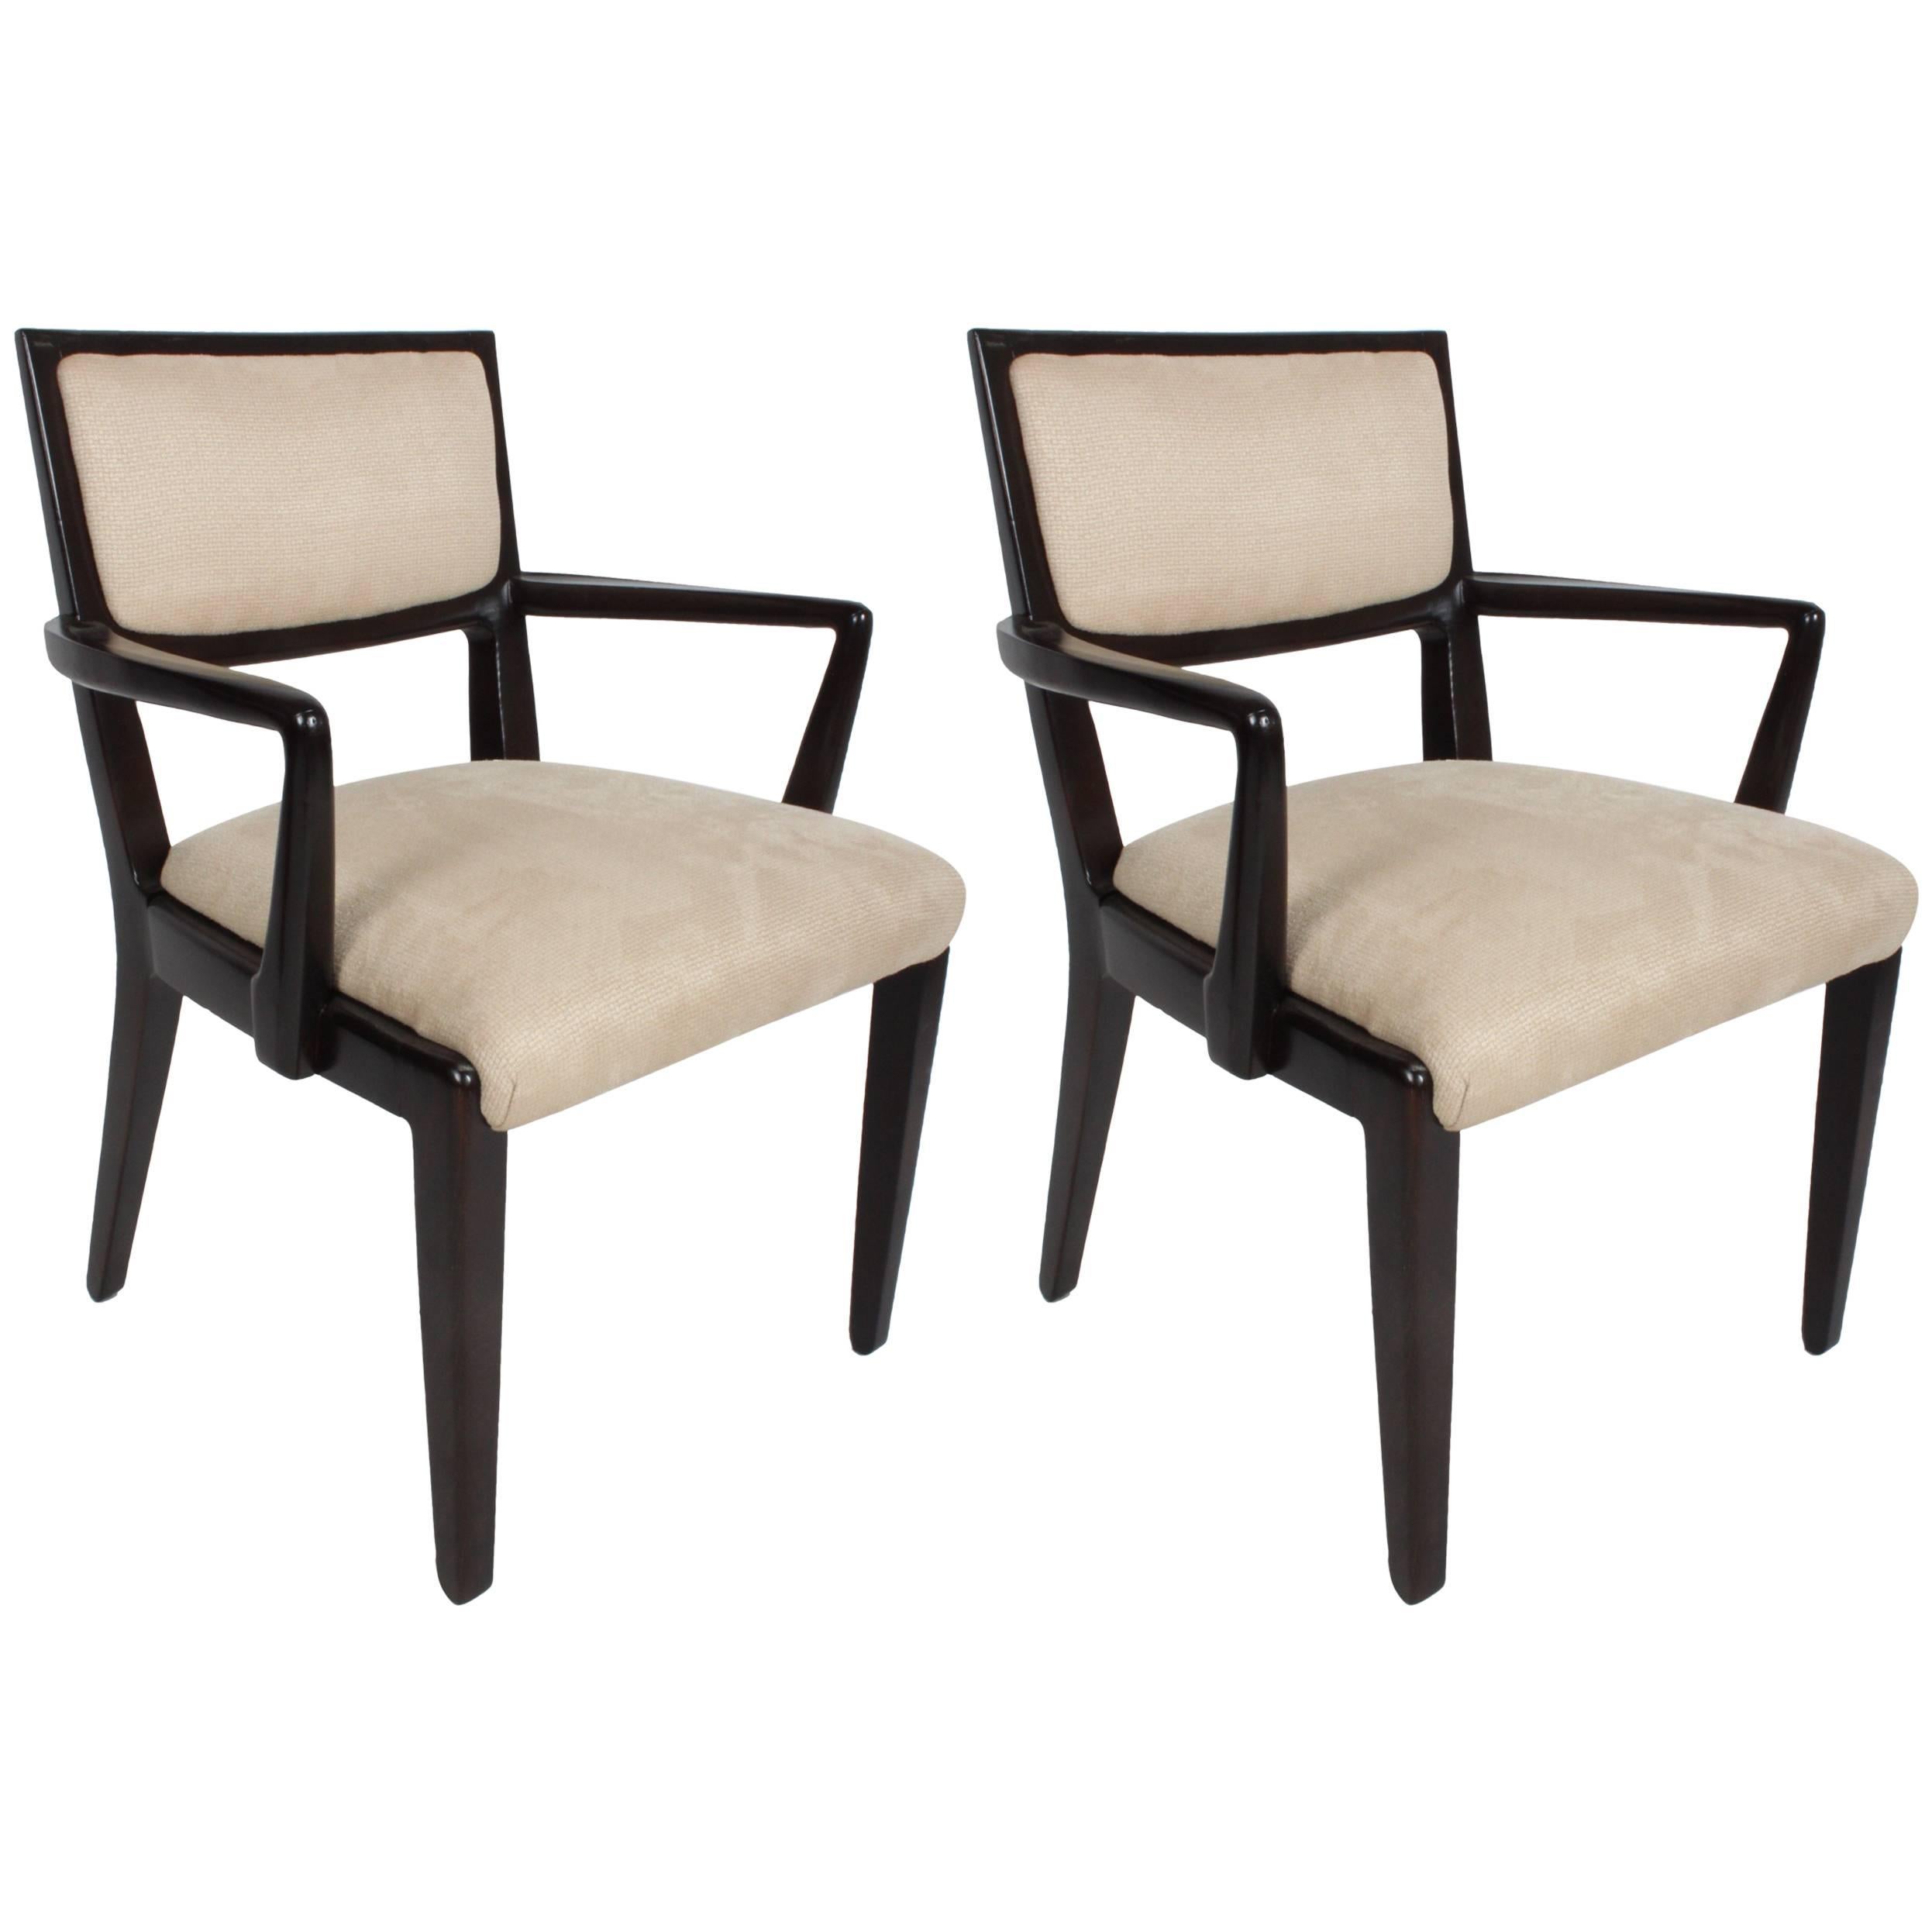 Pair of Edward Wormley for Drexel Arm Chairs - Precedent Collection  For Sale